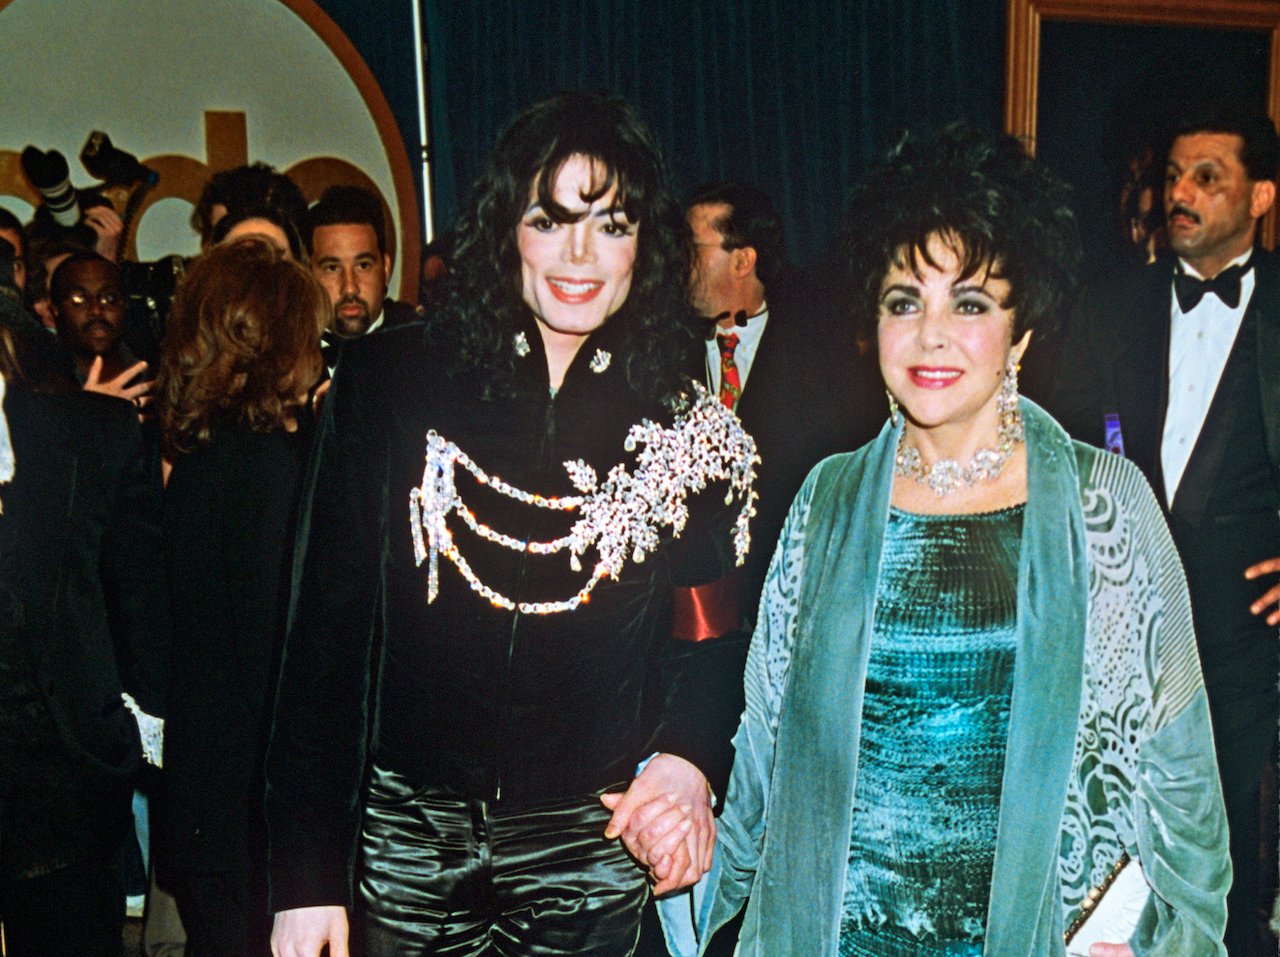 What Started Elizabeth Taylor’s ‘curious’ Friendship With Michael Jackson